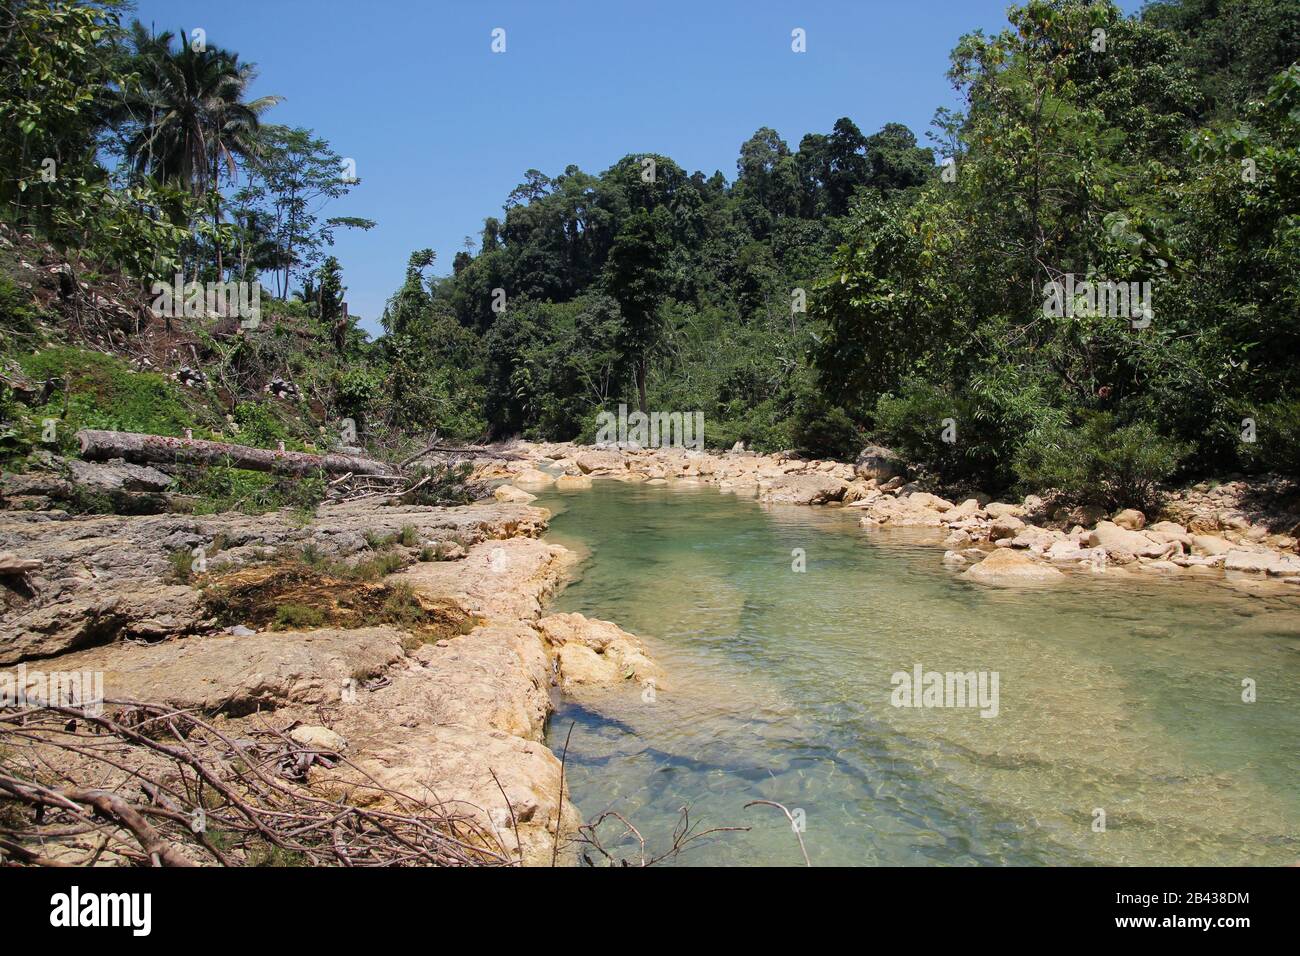 Scenic view of a clear river flowing through a forest in the Philippines. Stock Photo